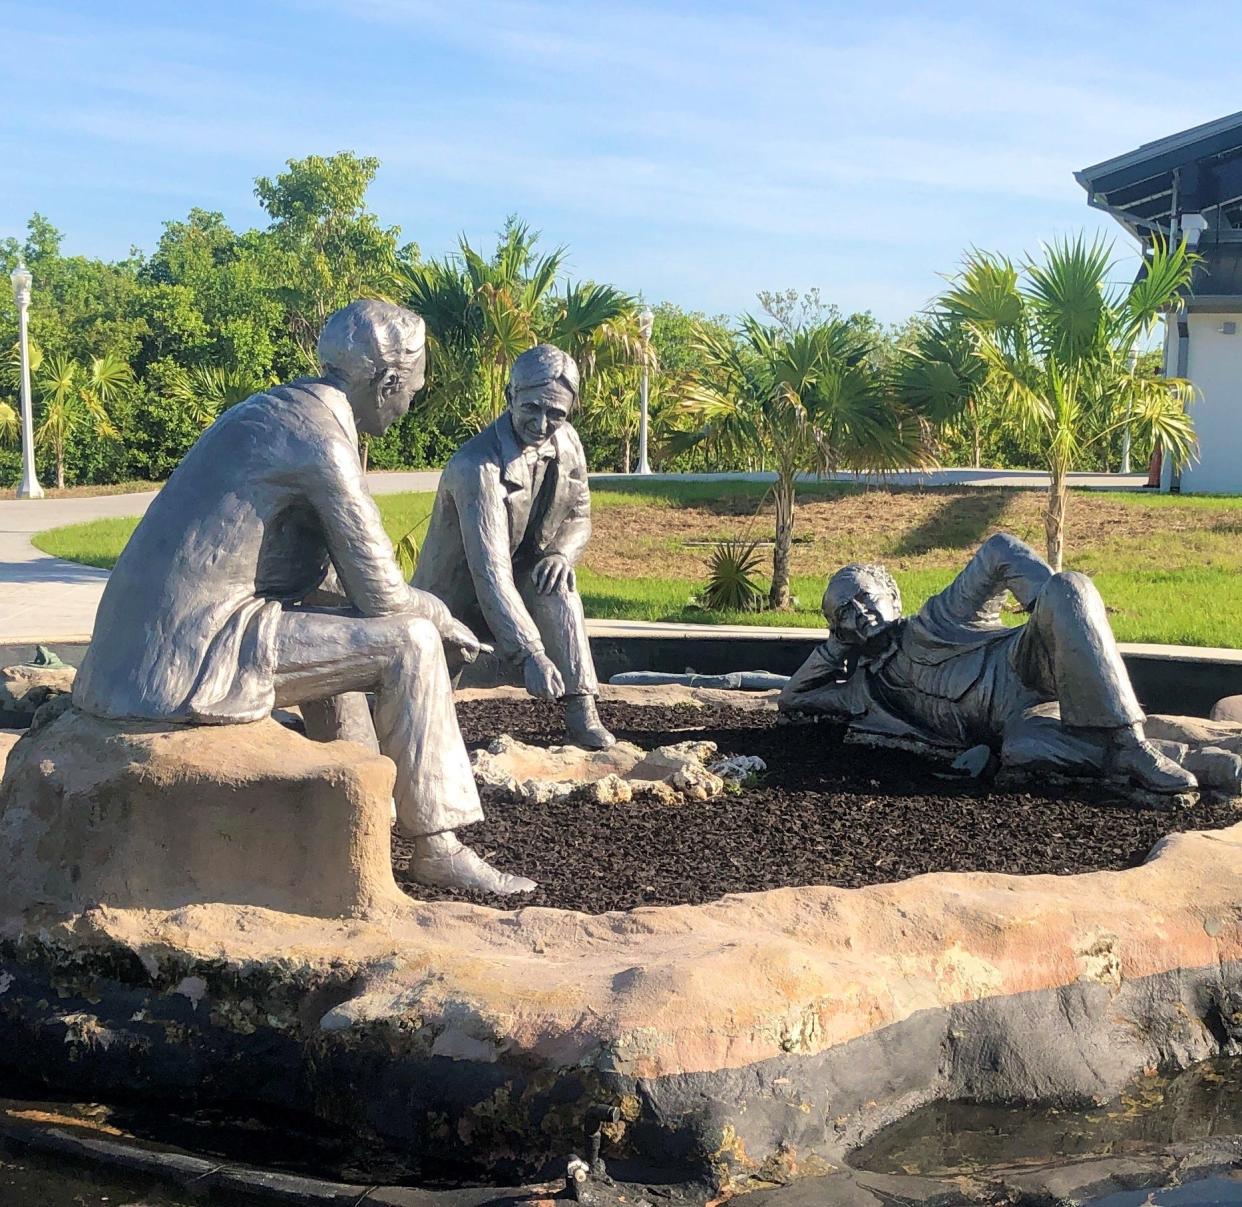 The "Uncommon Friends" statue in Fort Myers' Centennial Park portrays friends Thomas Edison, Henry Ford and Harvey Firestone on a camping trip in the Everglades.